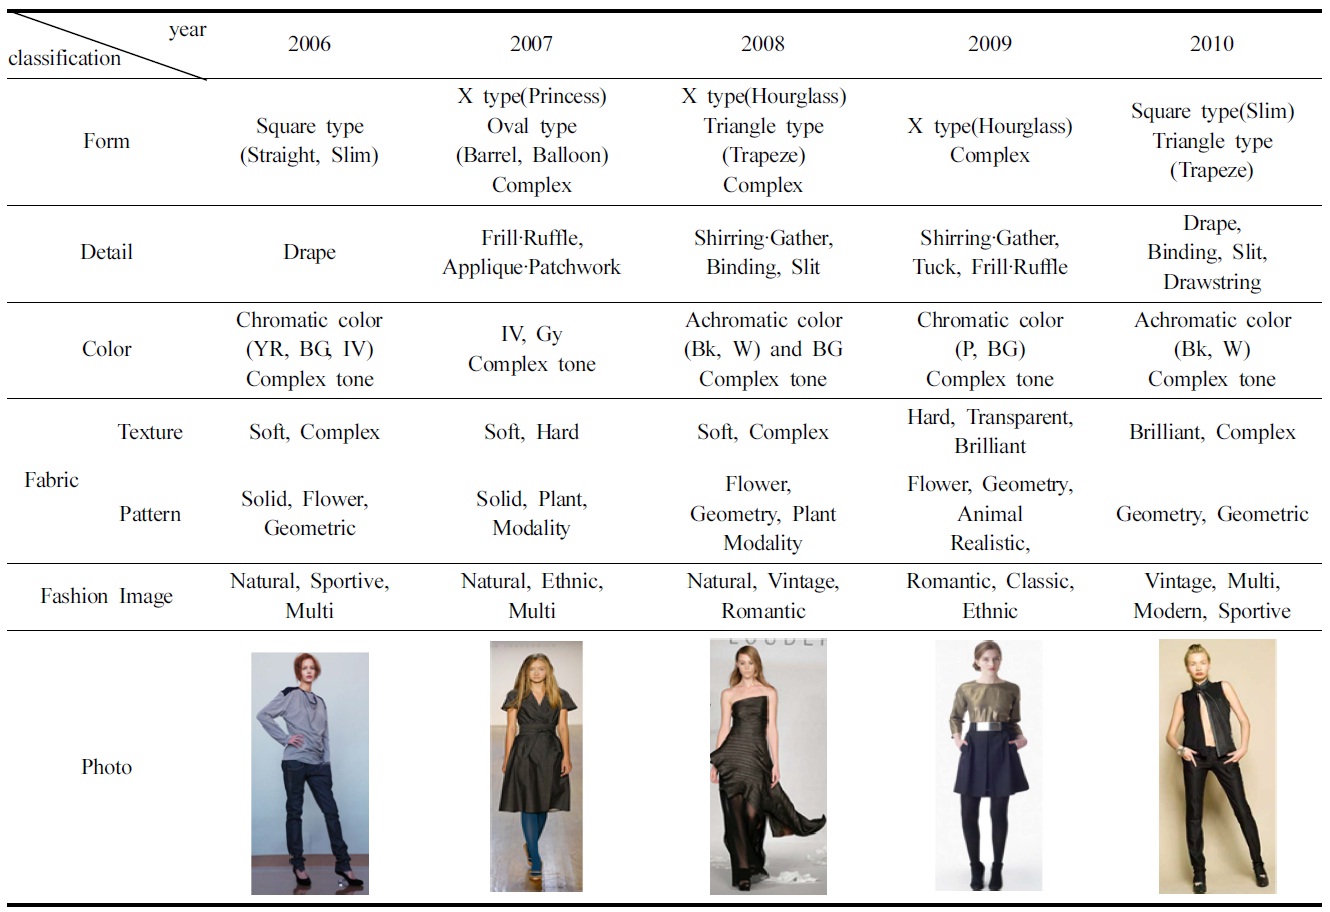 The characteristics of eco fashion design by years